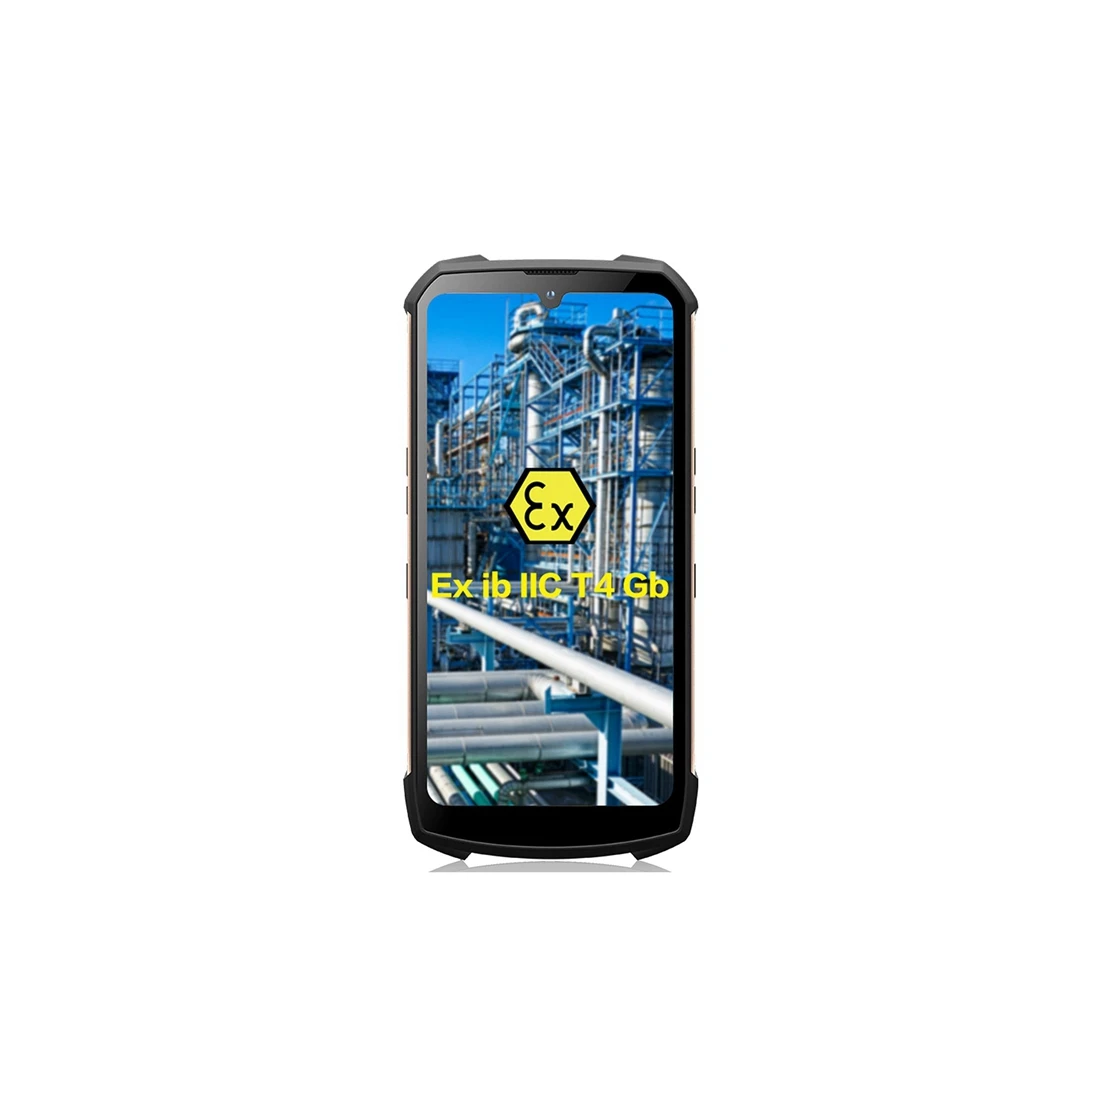 

conquest s16 ATEX Portable explosion-proof smartphone